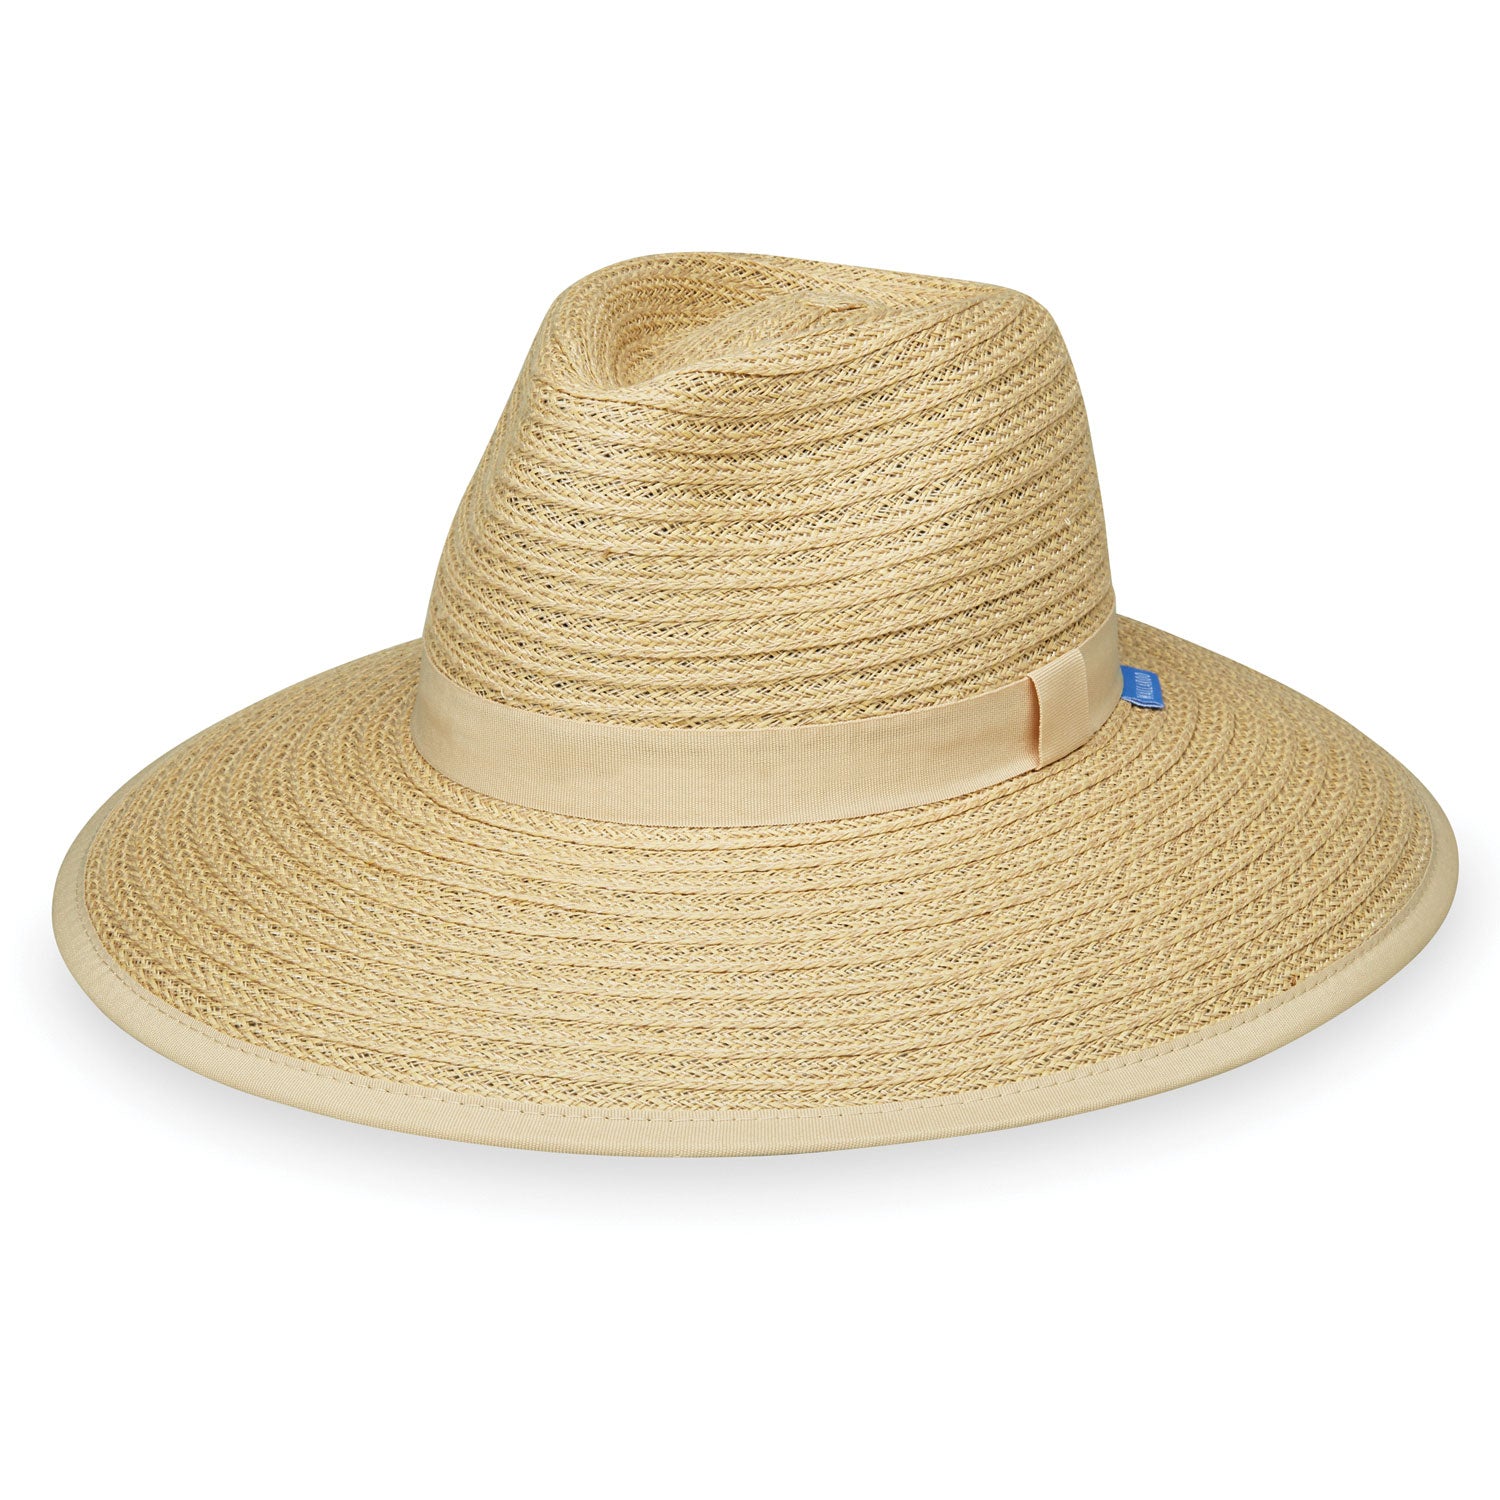 Featuring The Bali; a Packable Women's Wide Brim Fedora Style UPF straw sun hat from Wallaroo